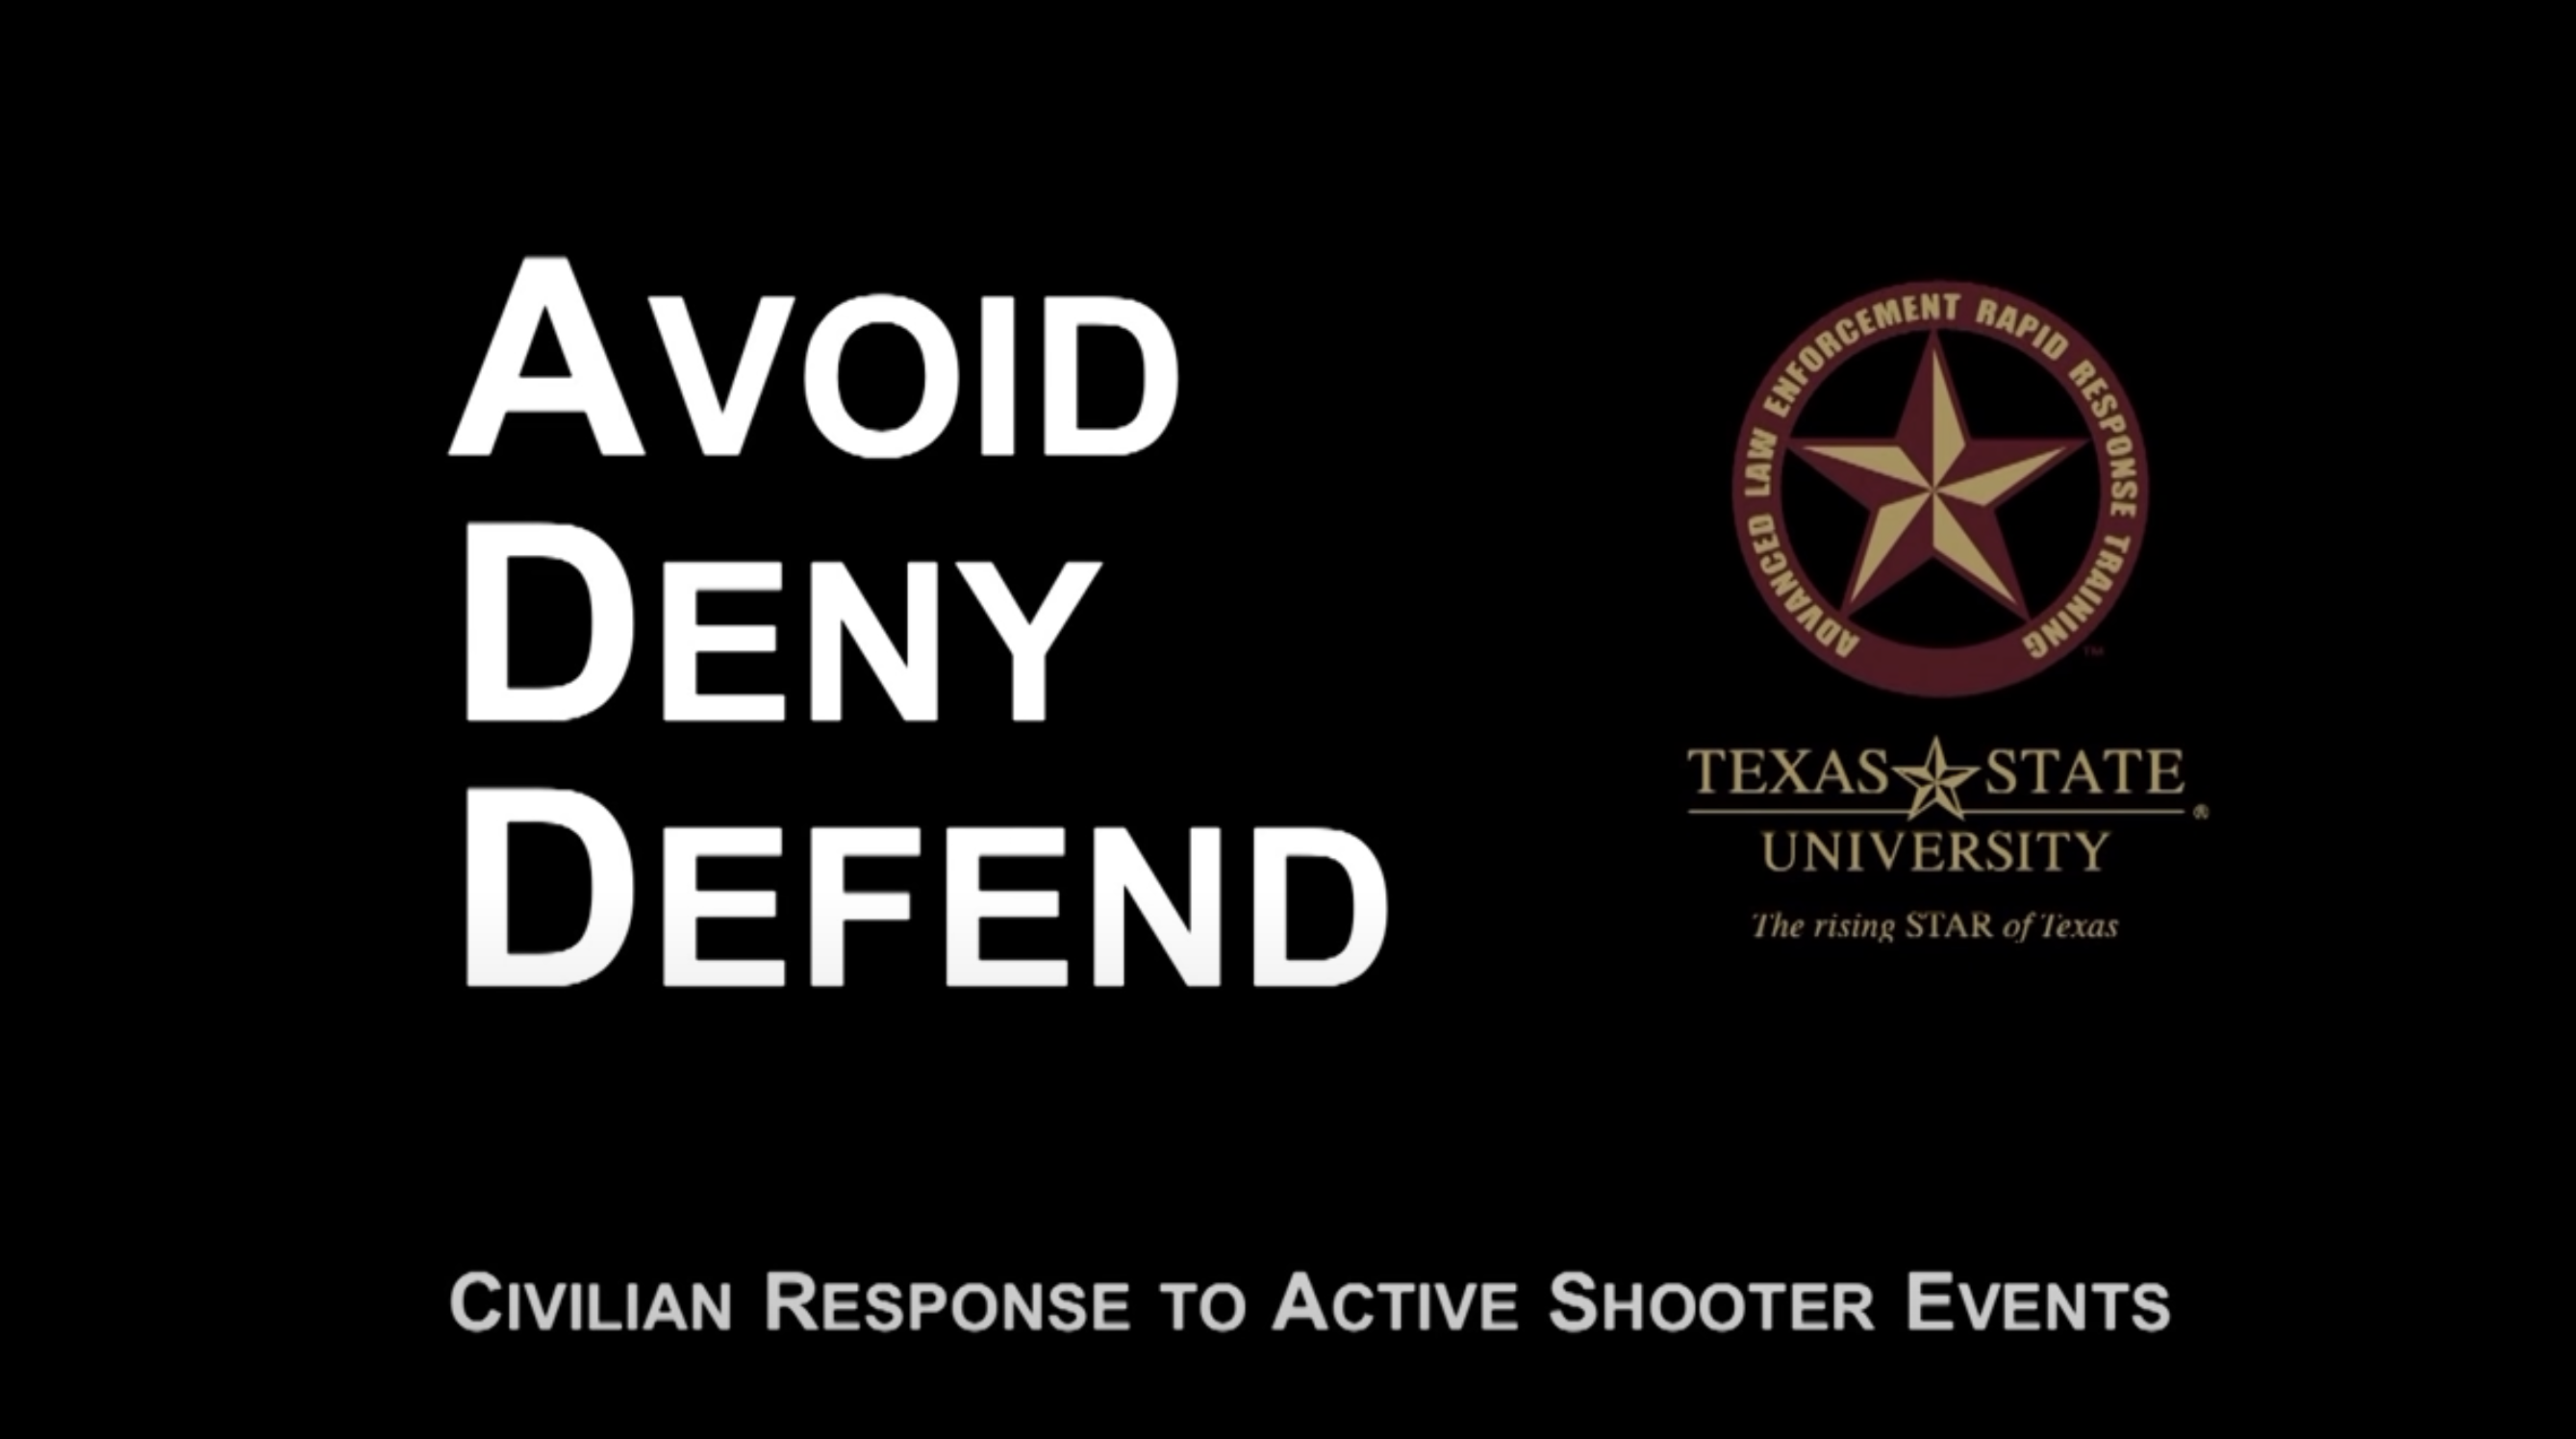 Civilian response to active shooter events